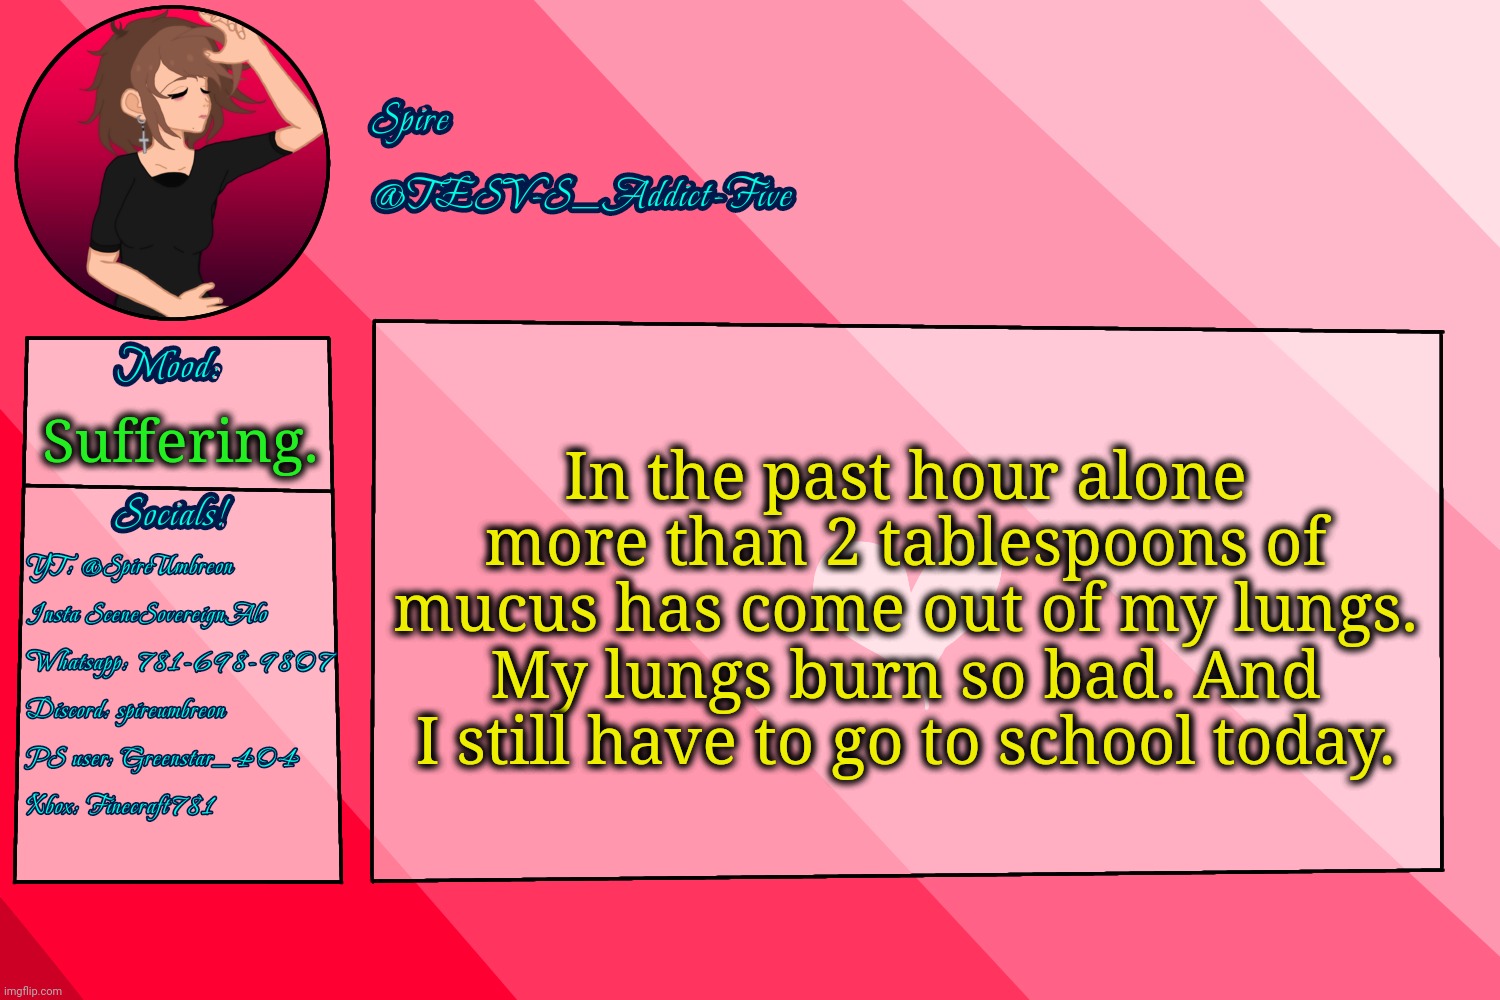 Help :sob: | In the past hour alone more than 2 tablespoons of mucus has come out of my lungs. My lungs burn so bad. And I still have to go to school today. Suffering. | image tagged in tesv-s_addict-five announcement template | made w/ Imgflip meme maker